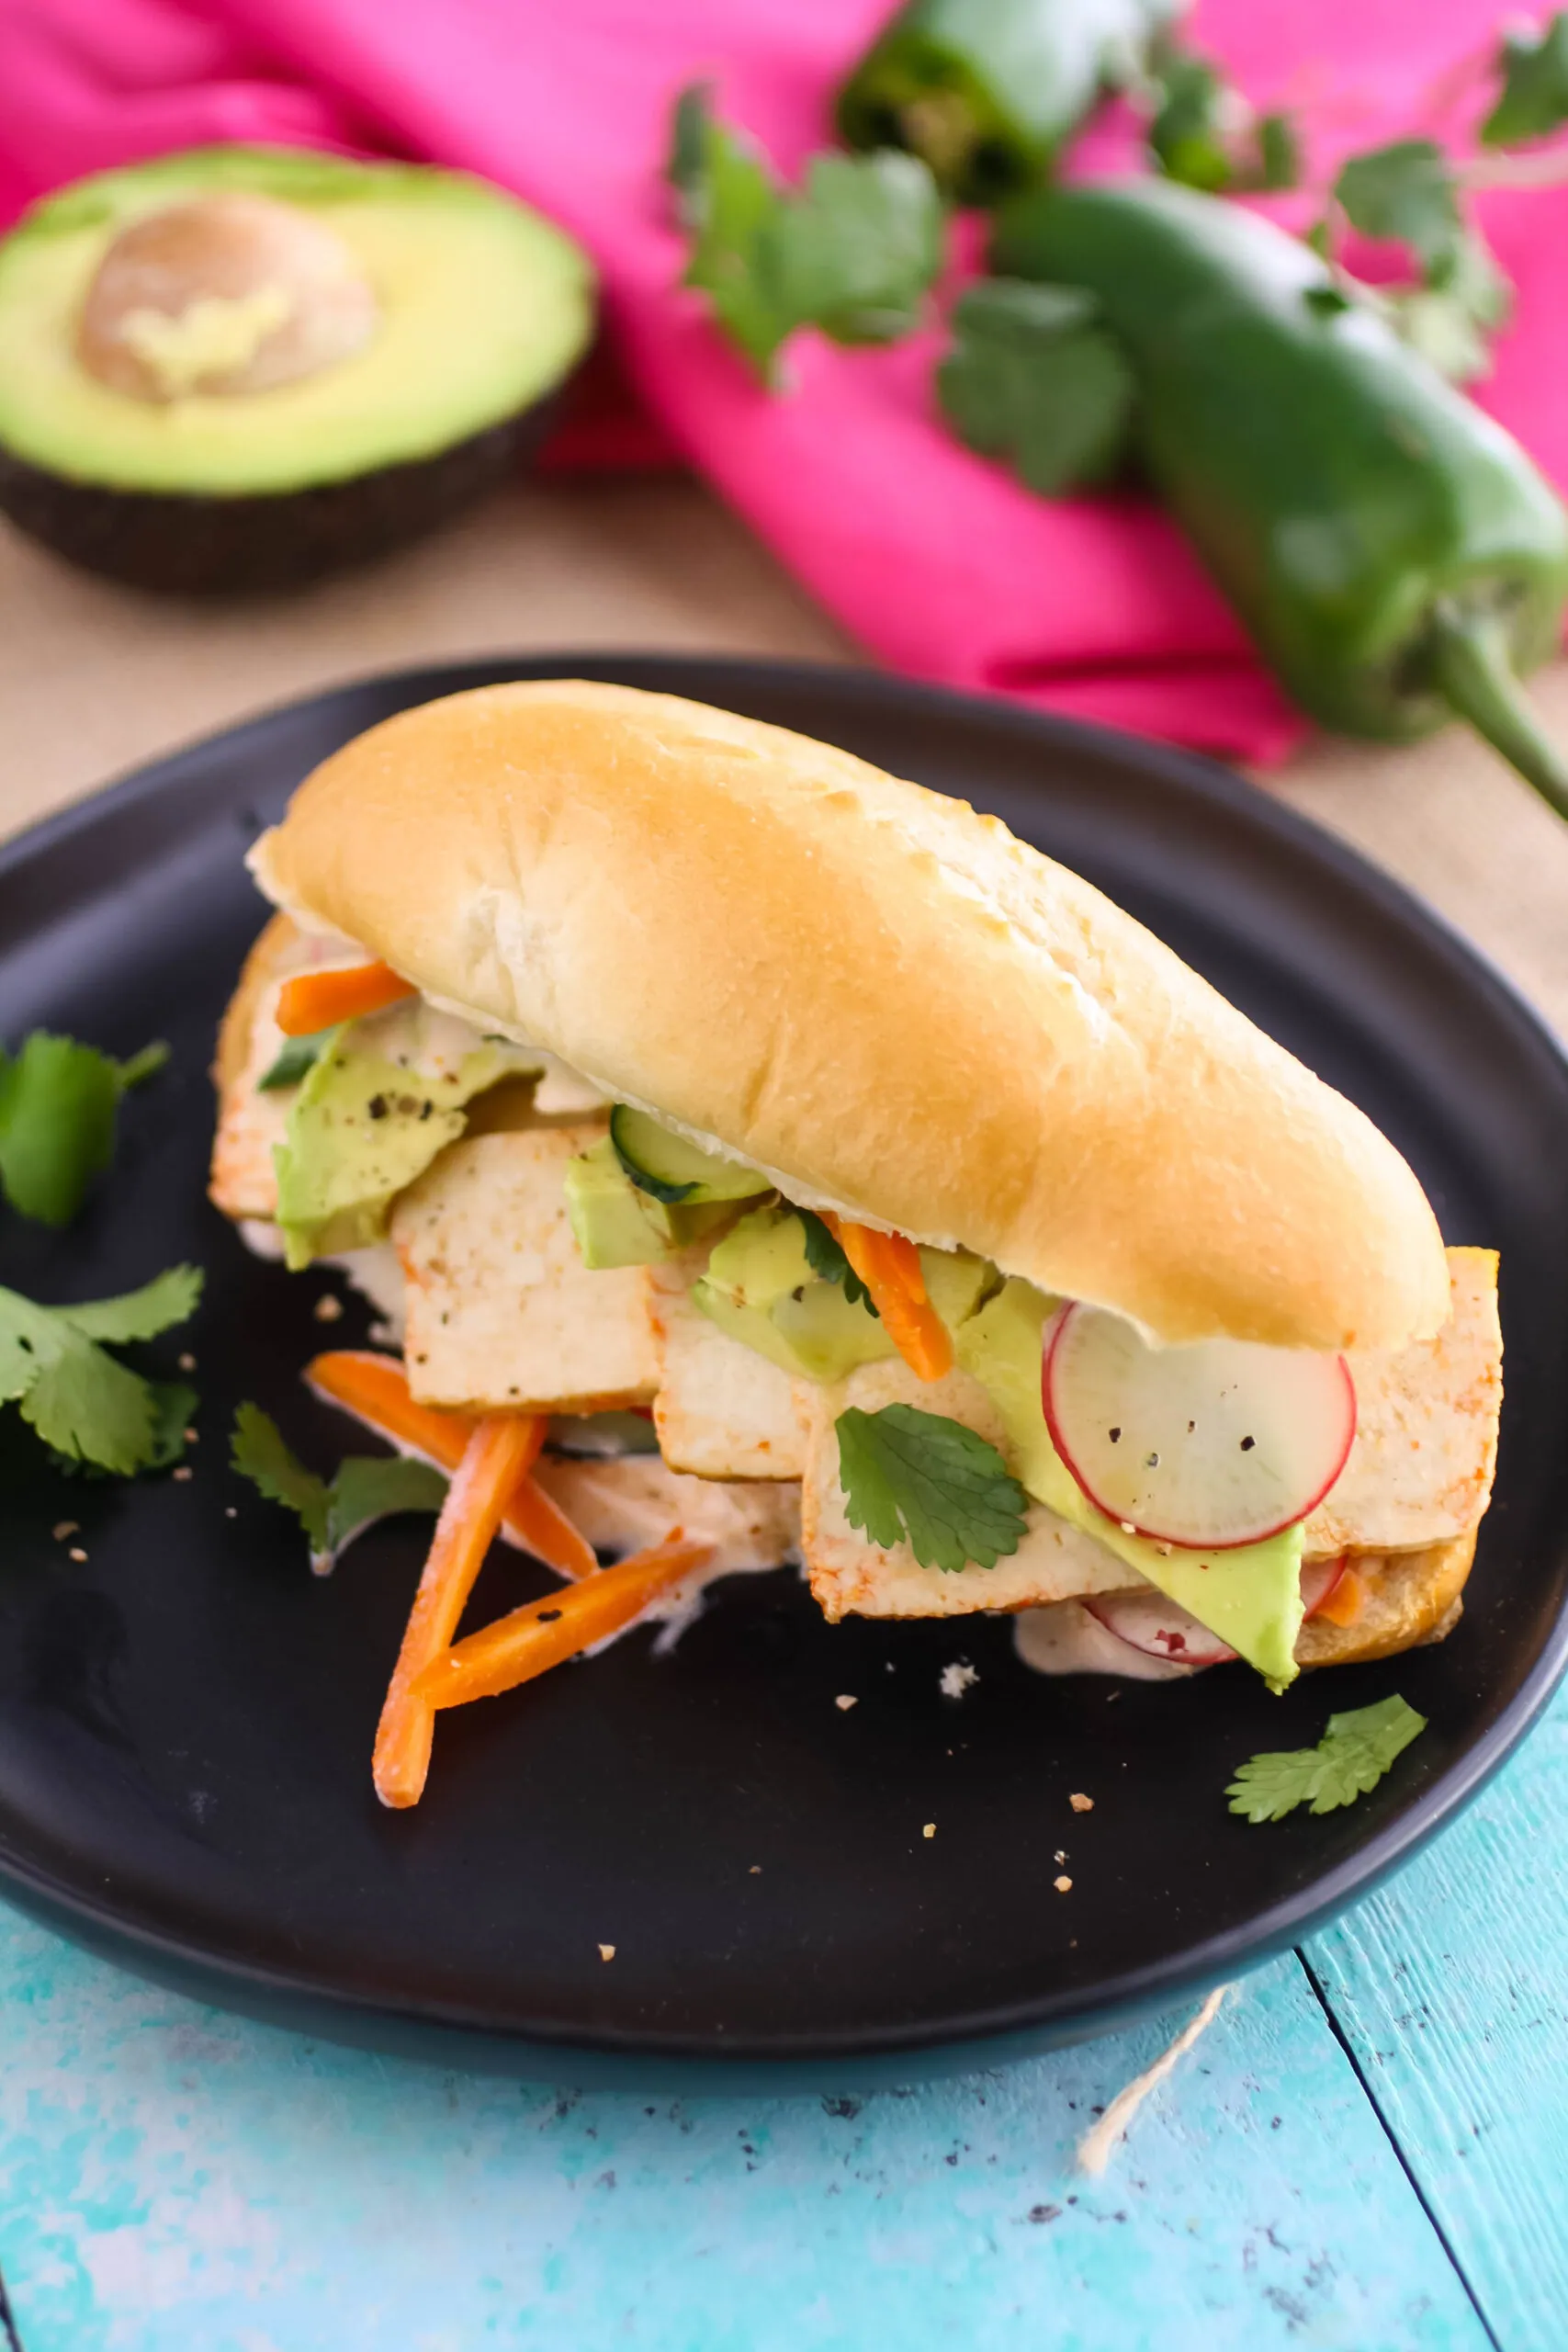 Spicy Tofu Banh Mi Sandwiches are hearty, colorful, and delicious for part of a great meal!